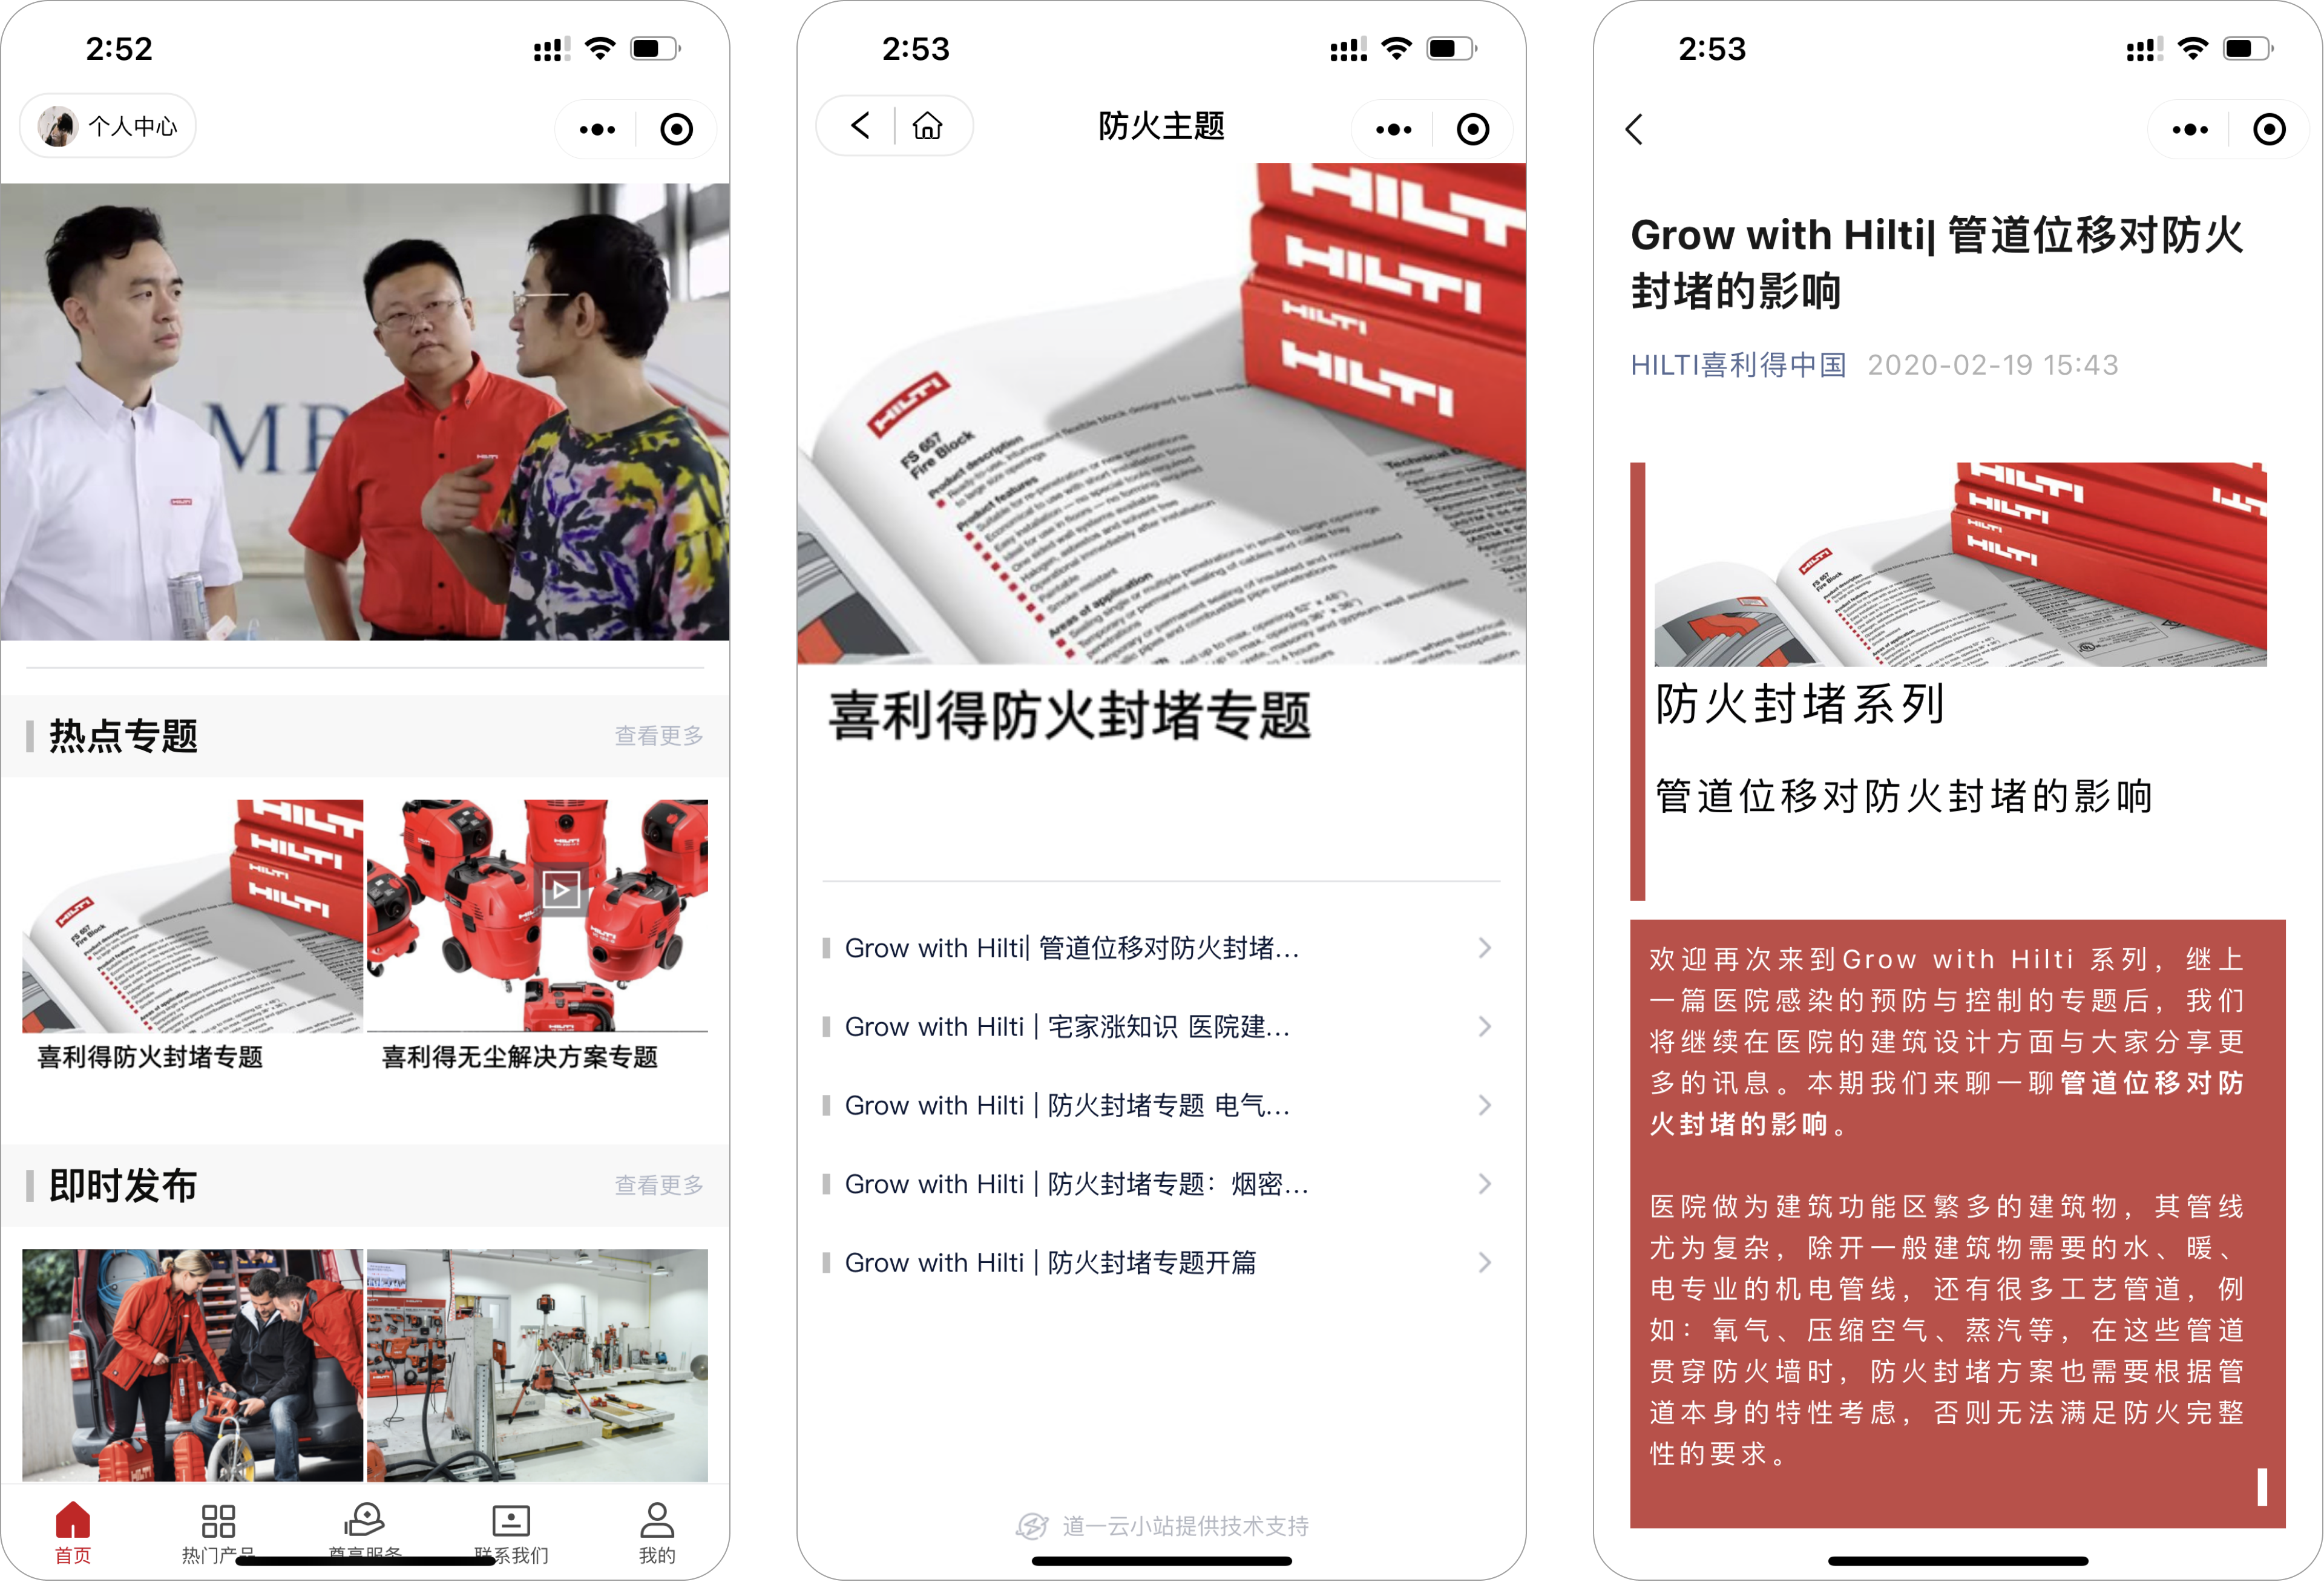 Hilti has anchored WeChat Official Account articles in its Mini Program to make use of past publications